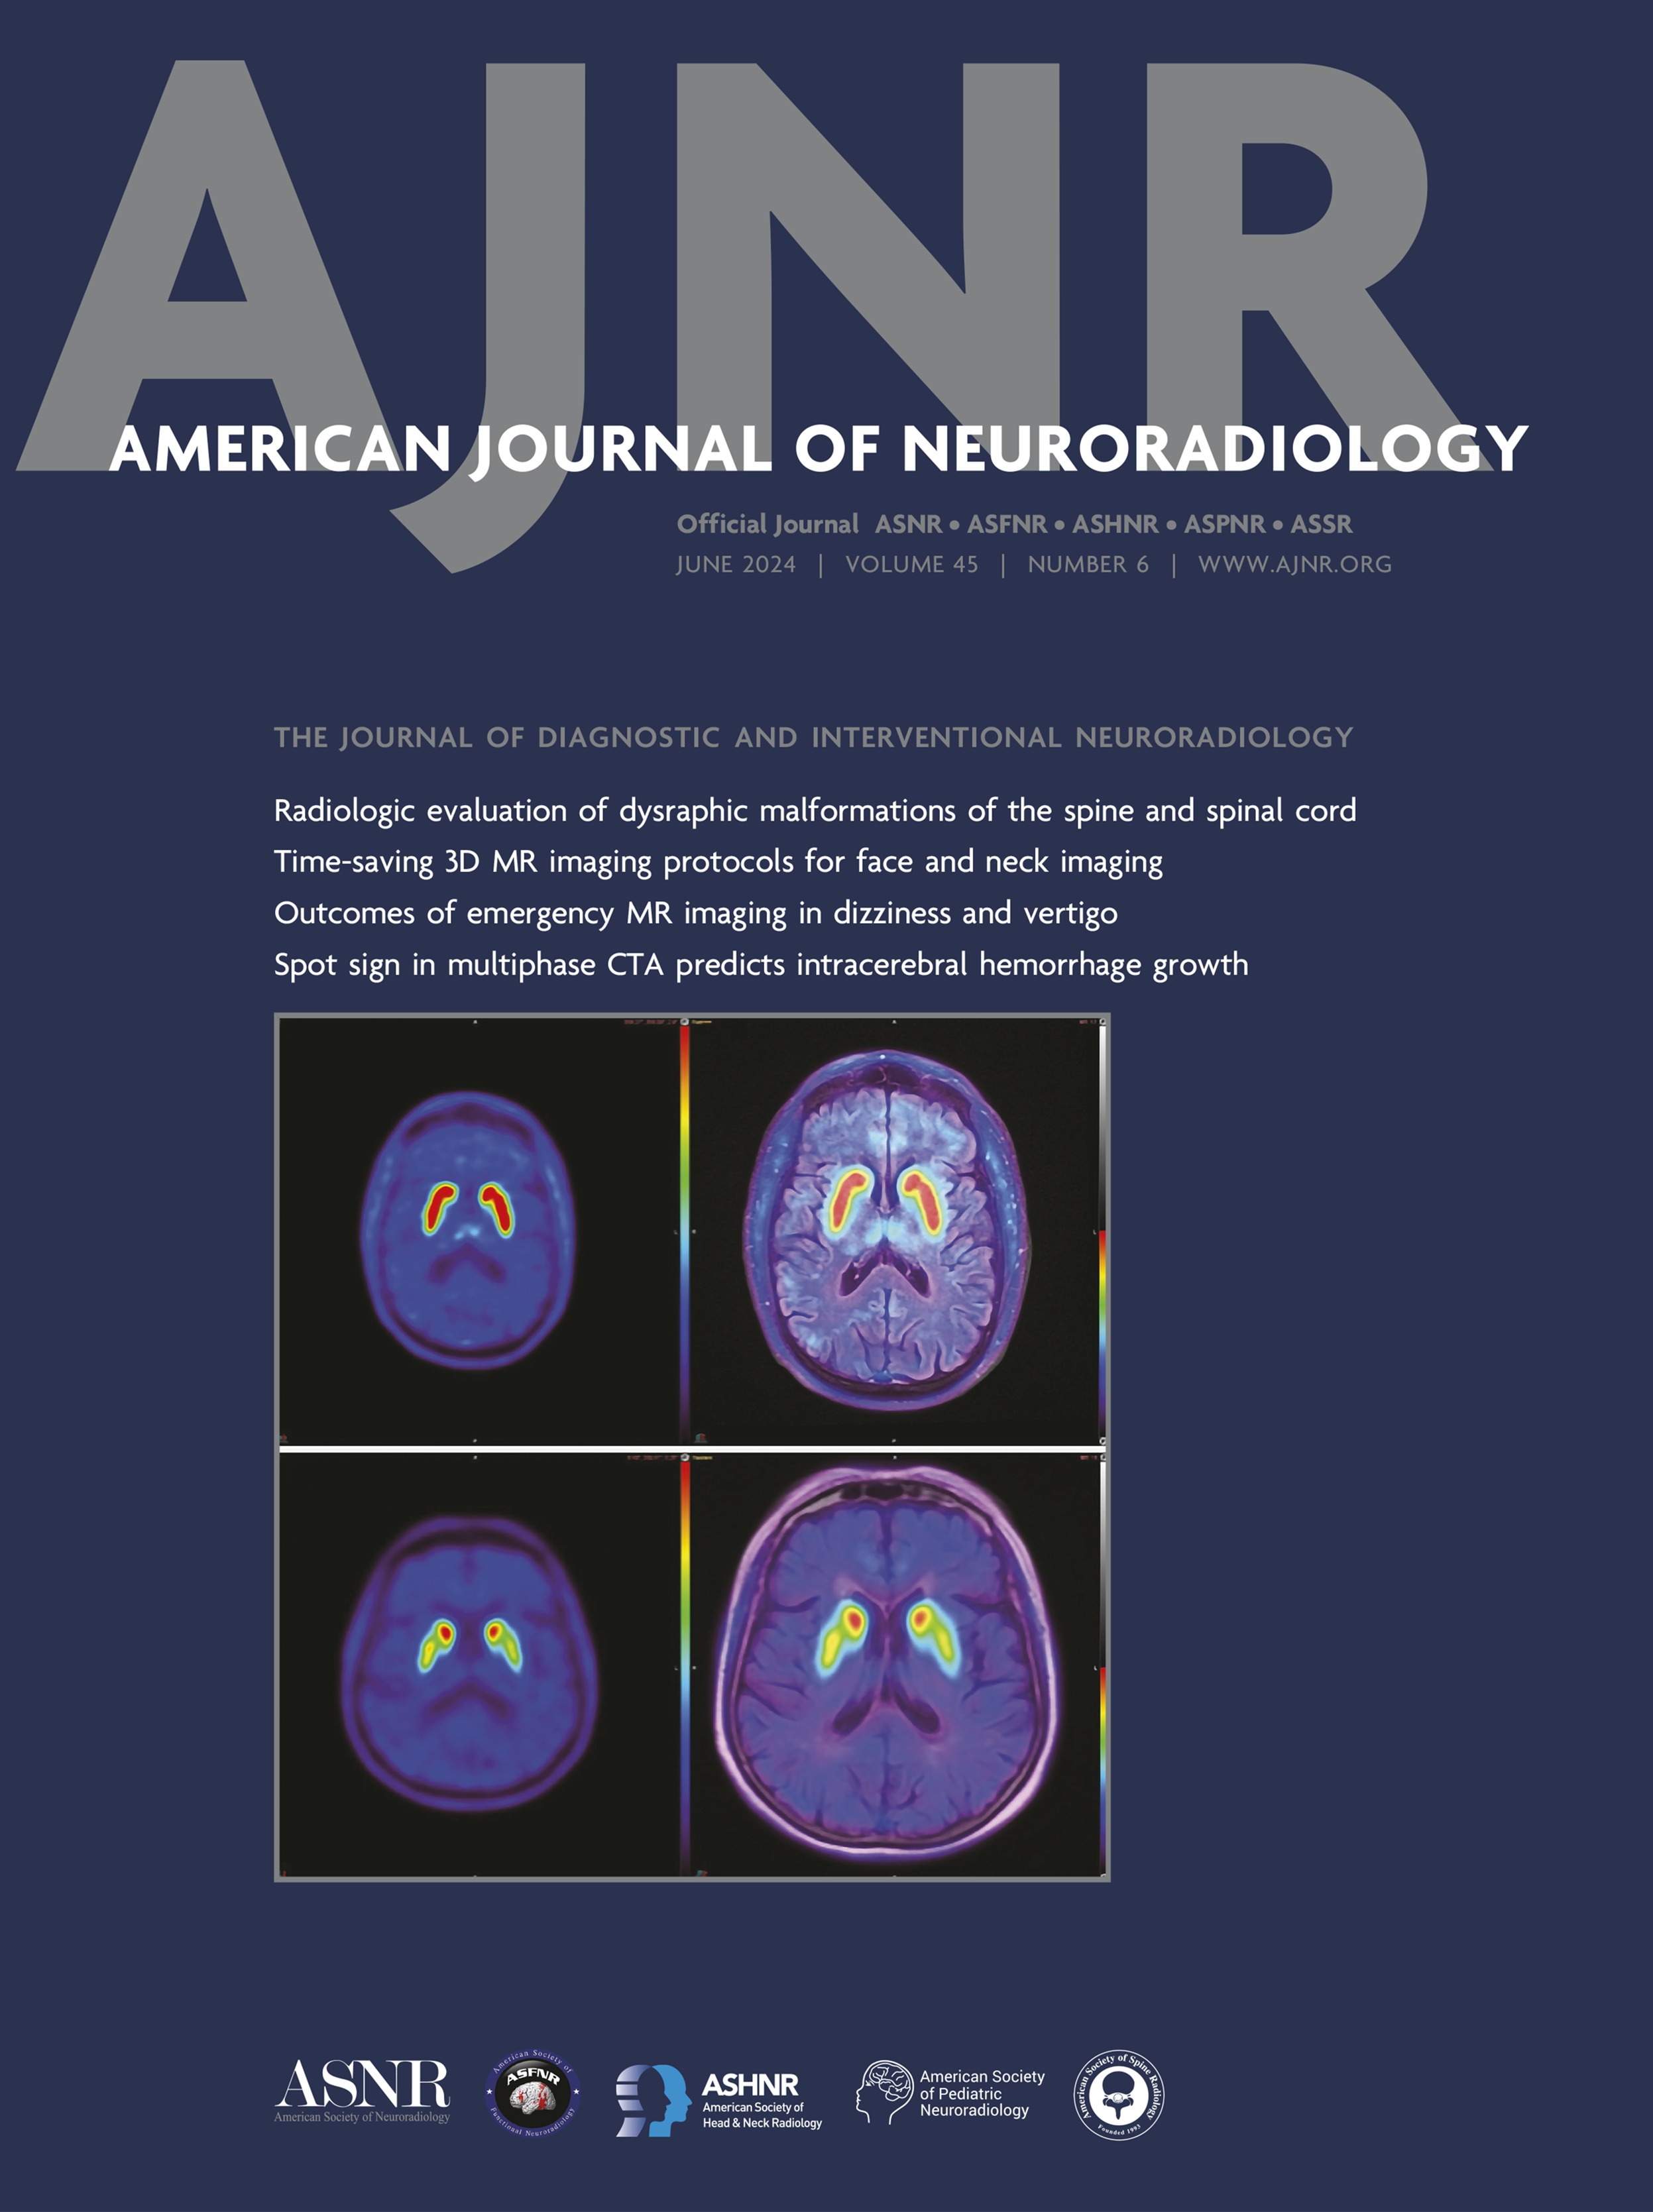 Cortical Hyperperfusion on MRI Arterial Spin-Labeling during the Interictal Period of Patients with Migraine Headache [NEUROVASCULAR/STROKE IMAGING]